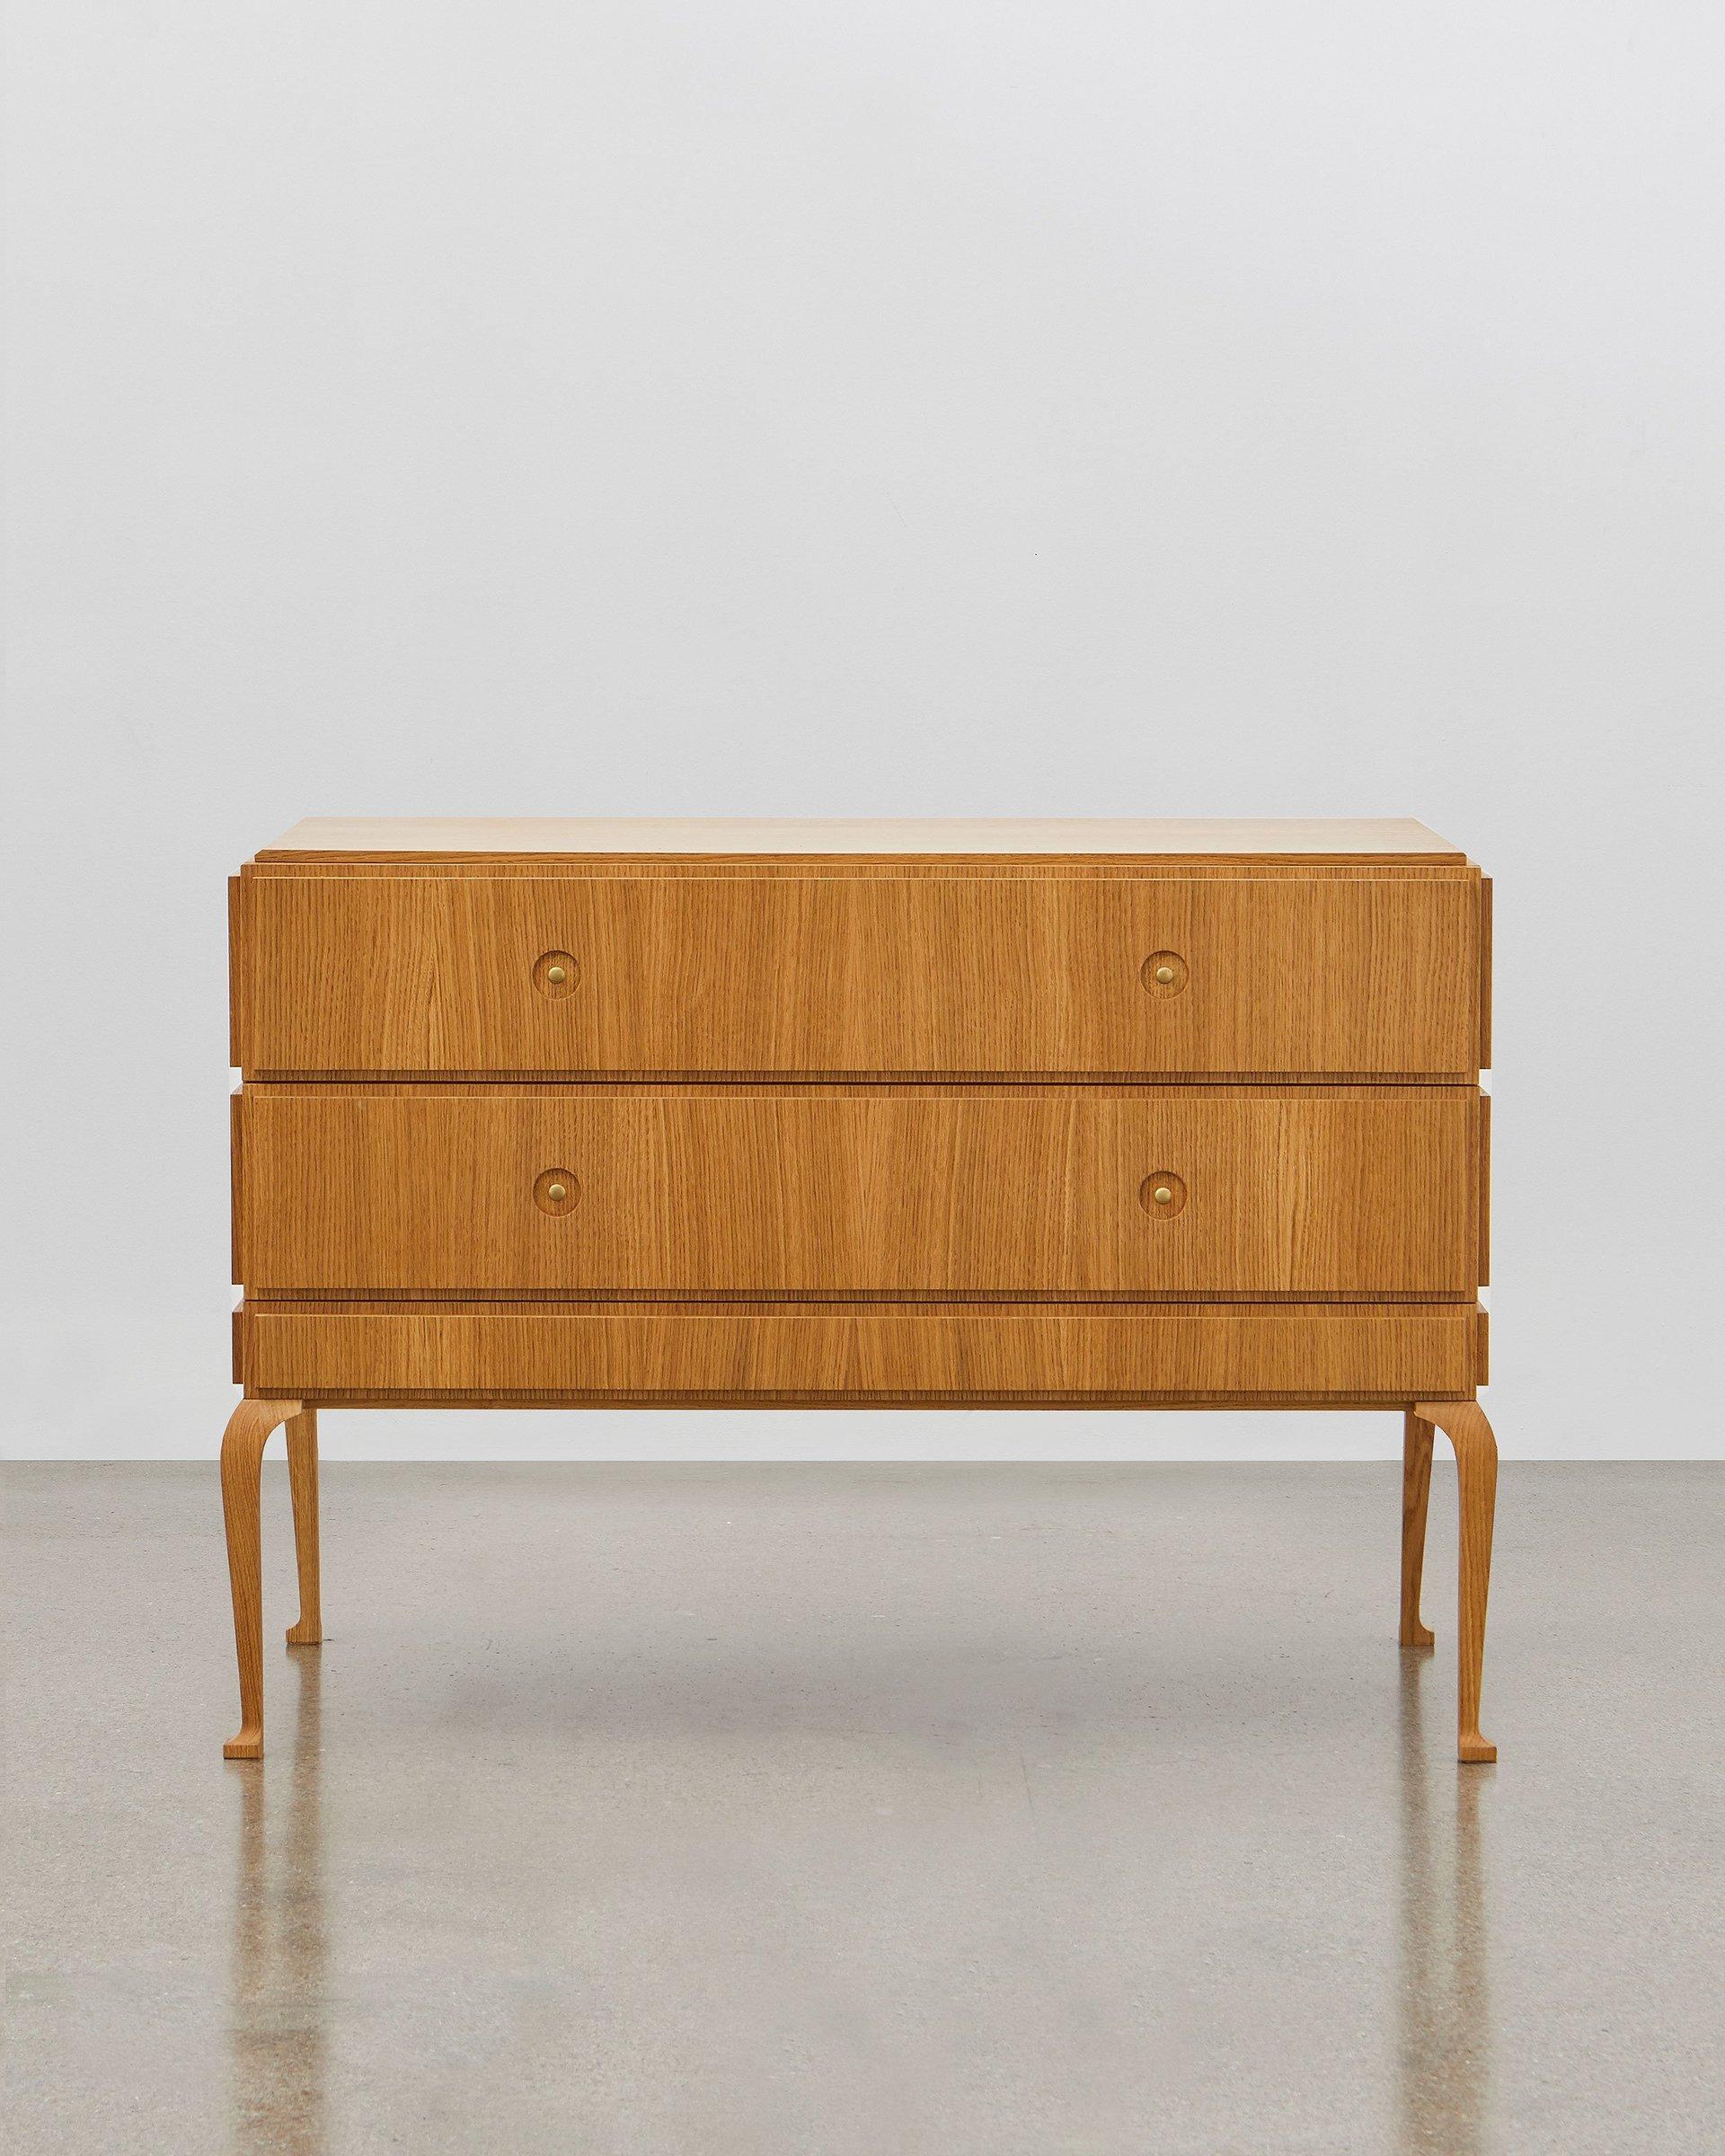 Created so it can be placed in the centre of a room, away from a wall, Poul Henningsen’s Grand Chest of Drawers features wooden panels on all sides. It is designed to be admired and considered from every angle.

This piece highlights the